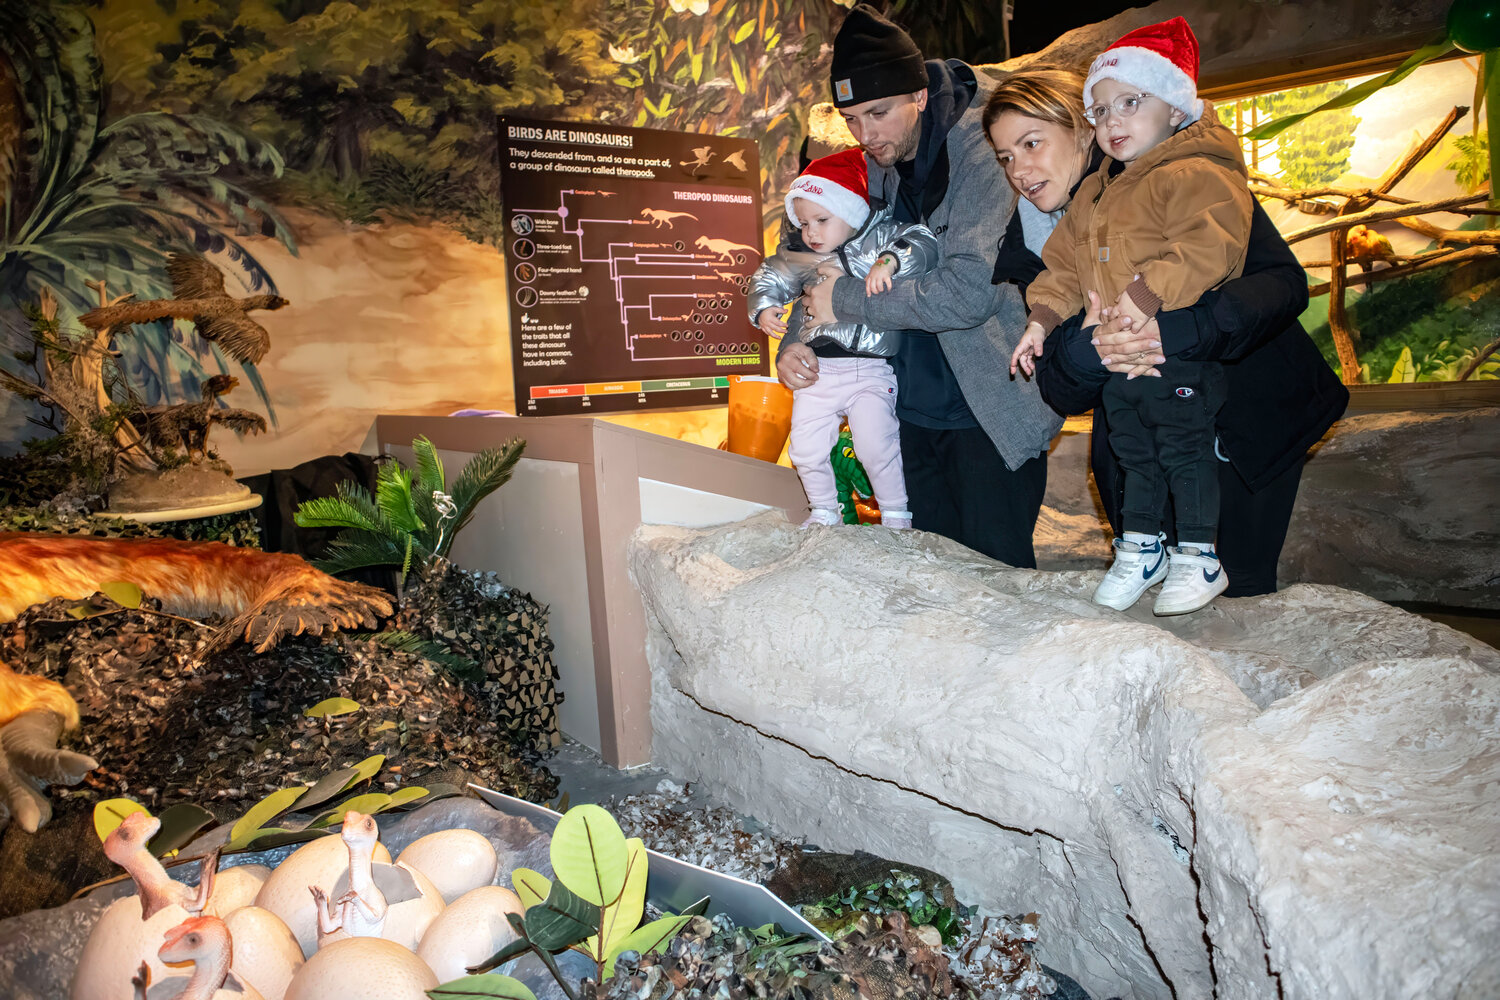 Checking out the baby dinosaurs as they are hatched are (L-R) Andreanna Aiosa (Age 2), Vincenzo Aiosa, Tanya Aiosa, Vincenzo Aiosa (Age 2).